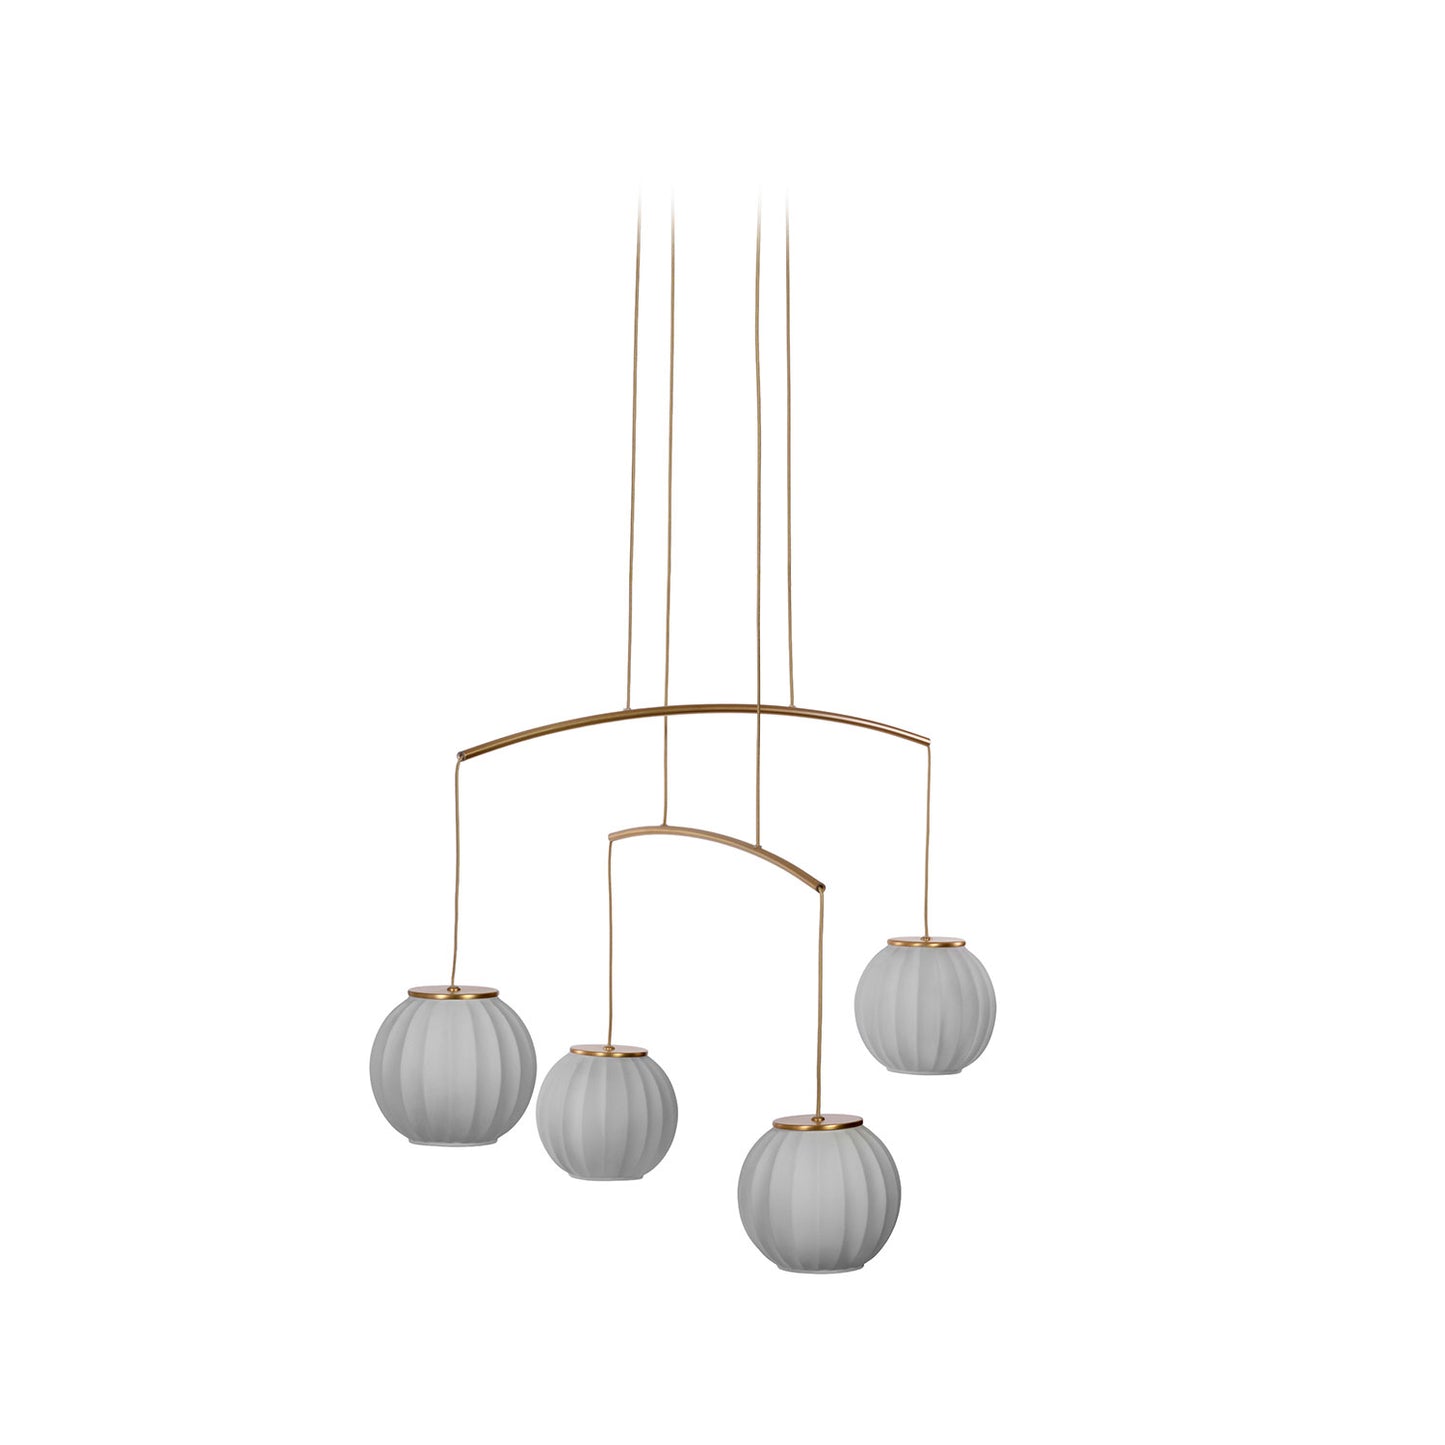 Modern pendant lamp with metal structure - 5 Light Chandelier